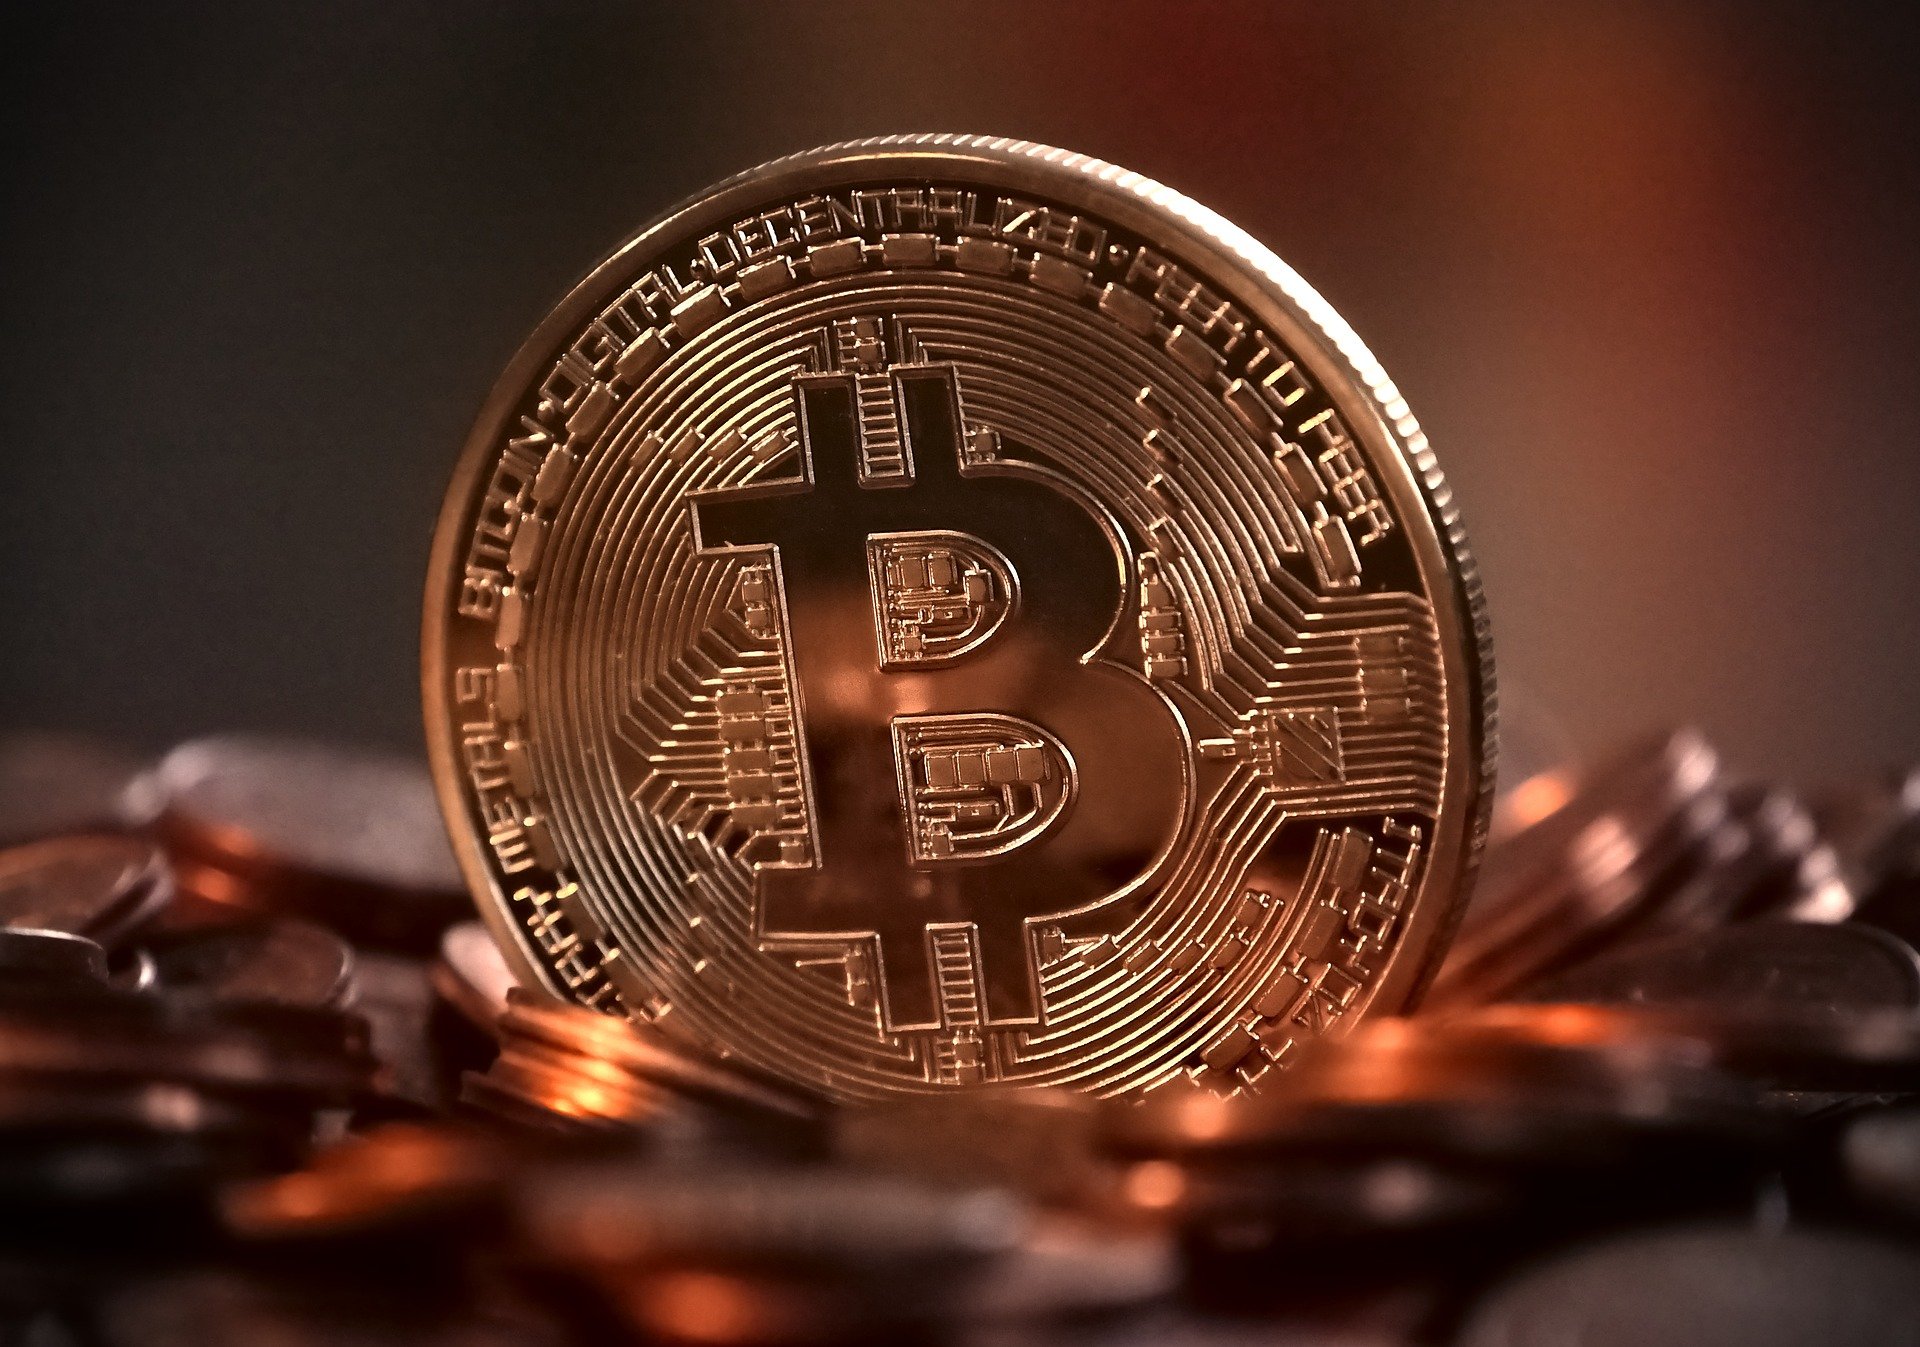 Value of bitcoin drops due to Omicron variant